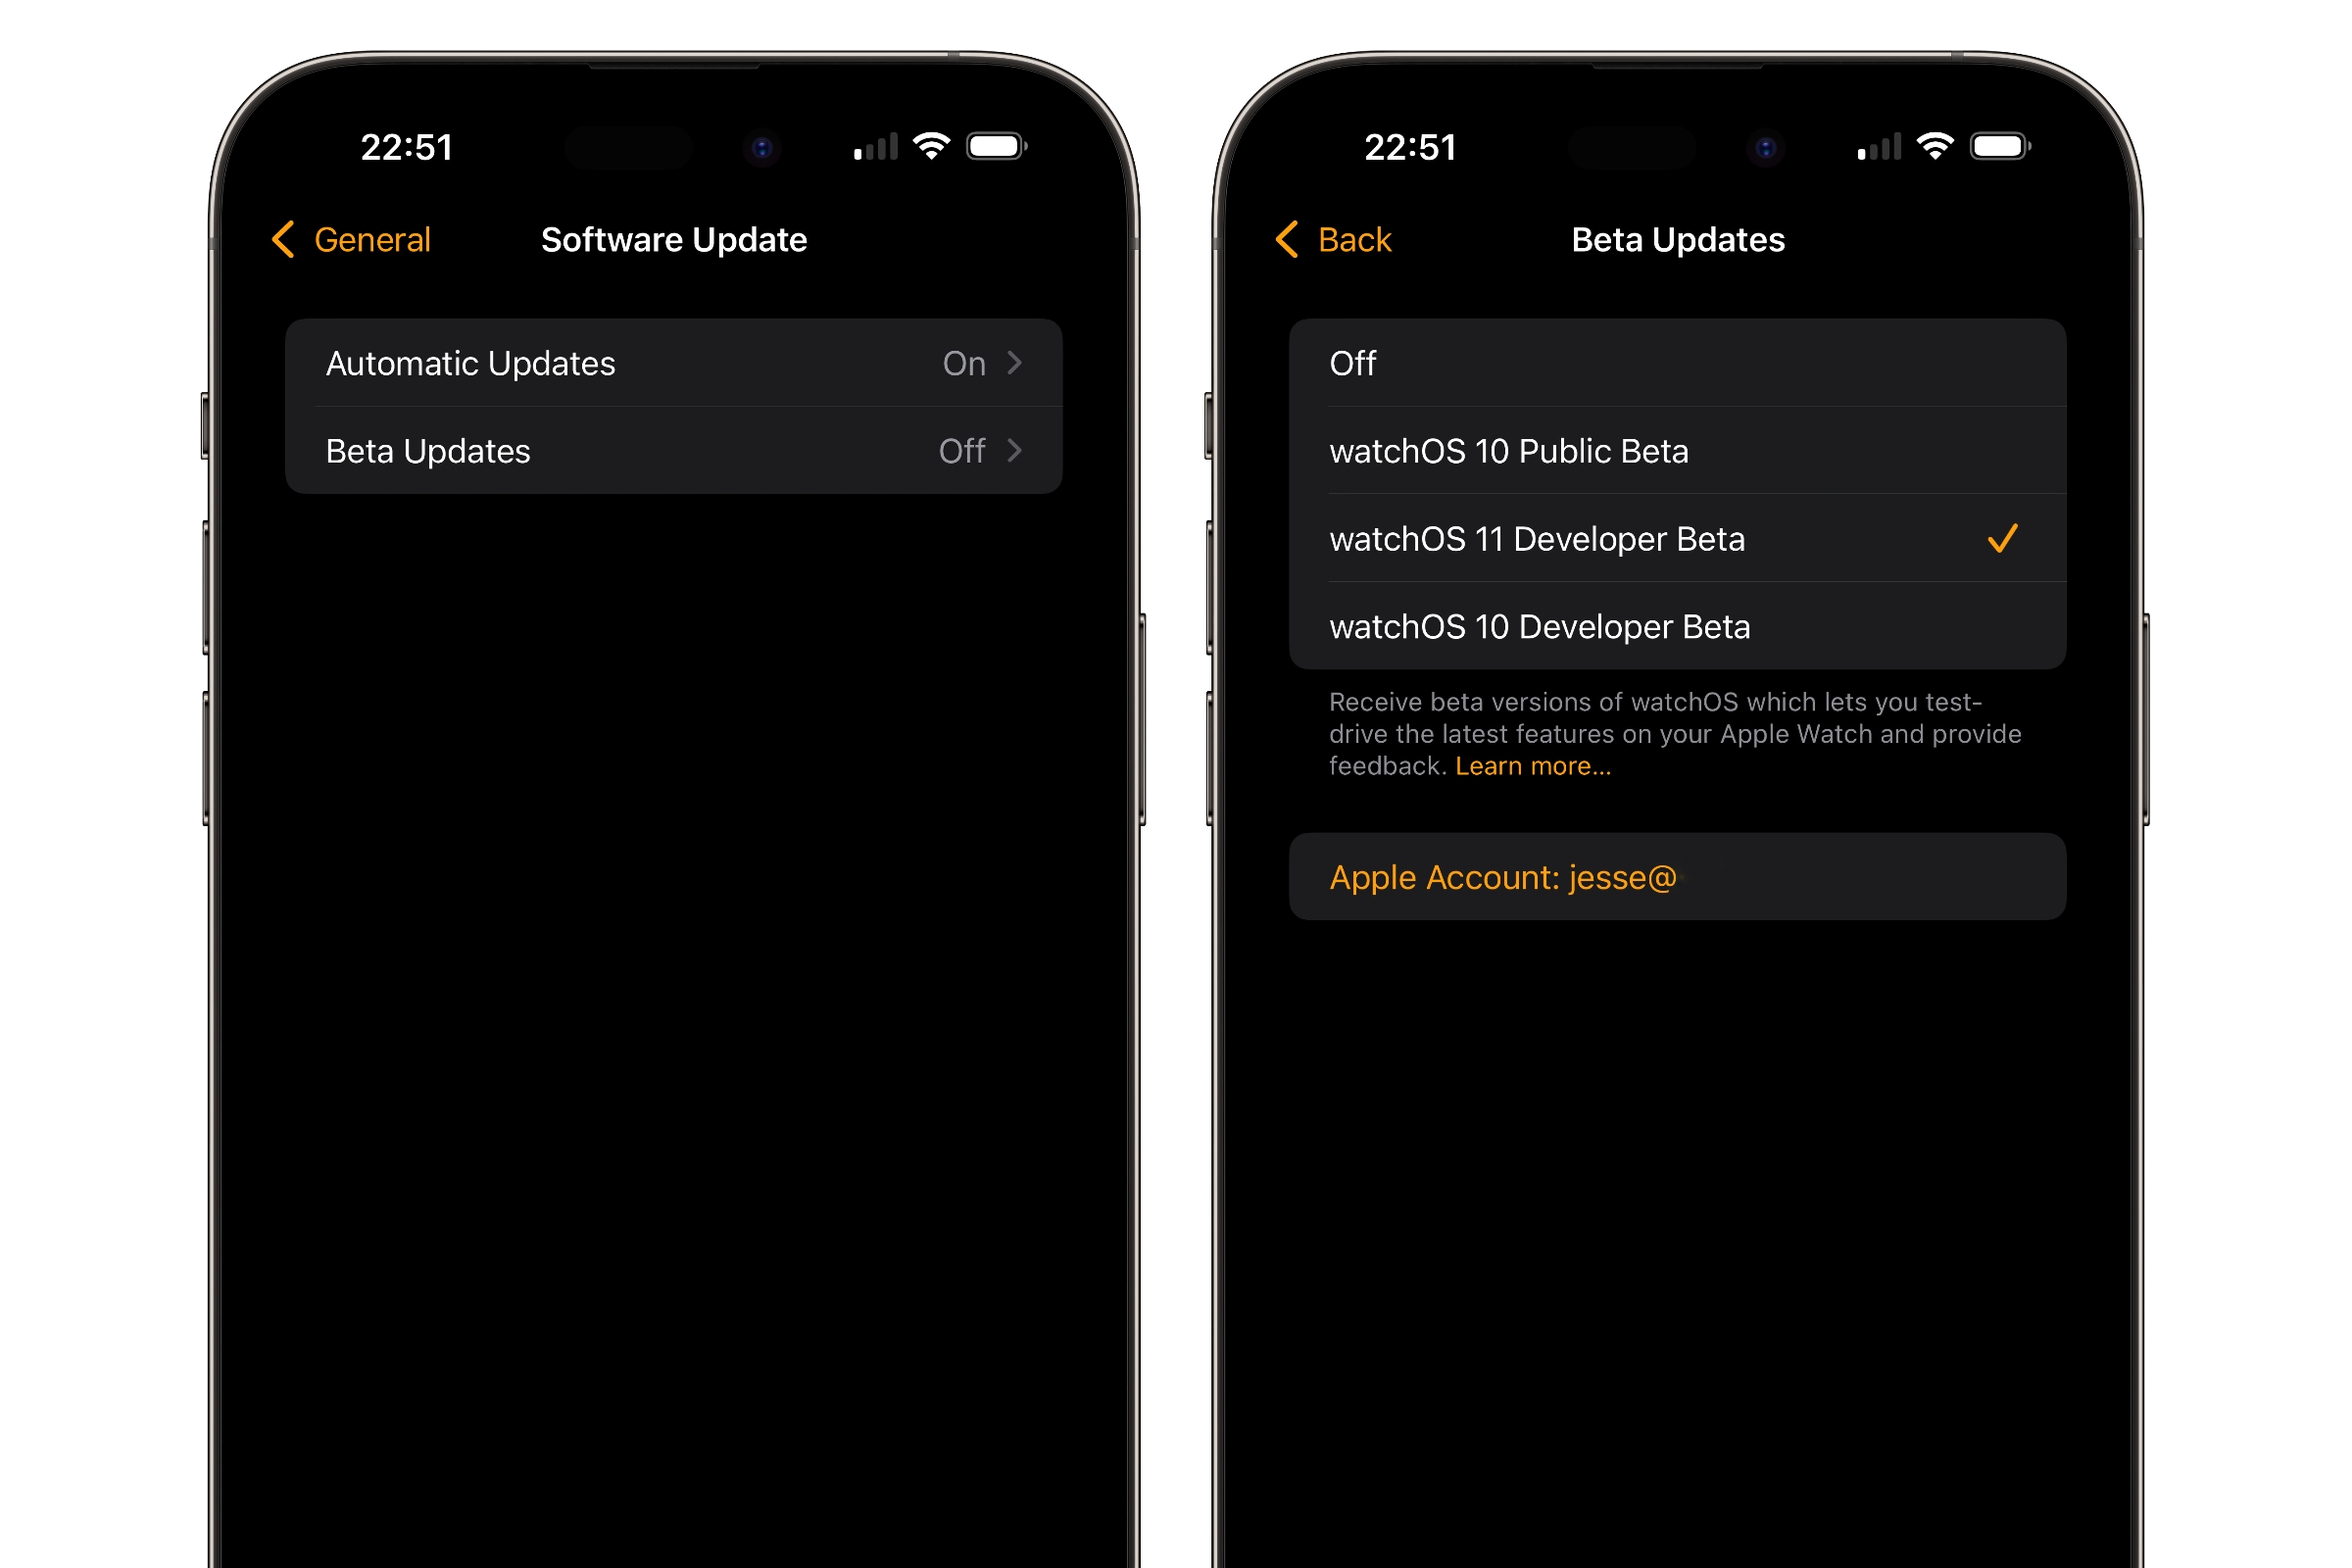 iPhone showing settings to enable watchOS 11 Developer Beta updates.